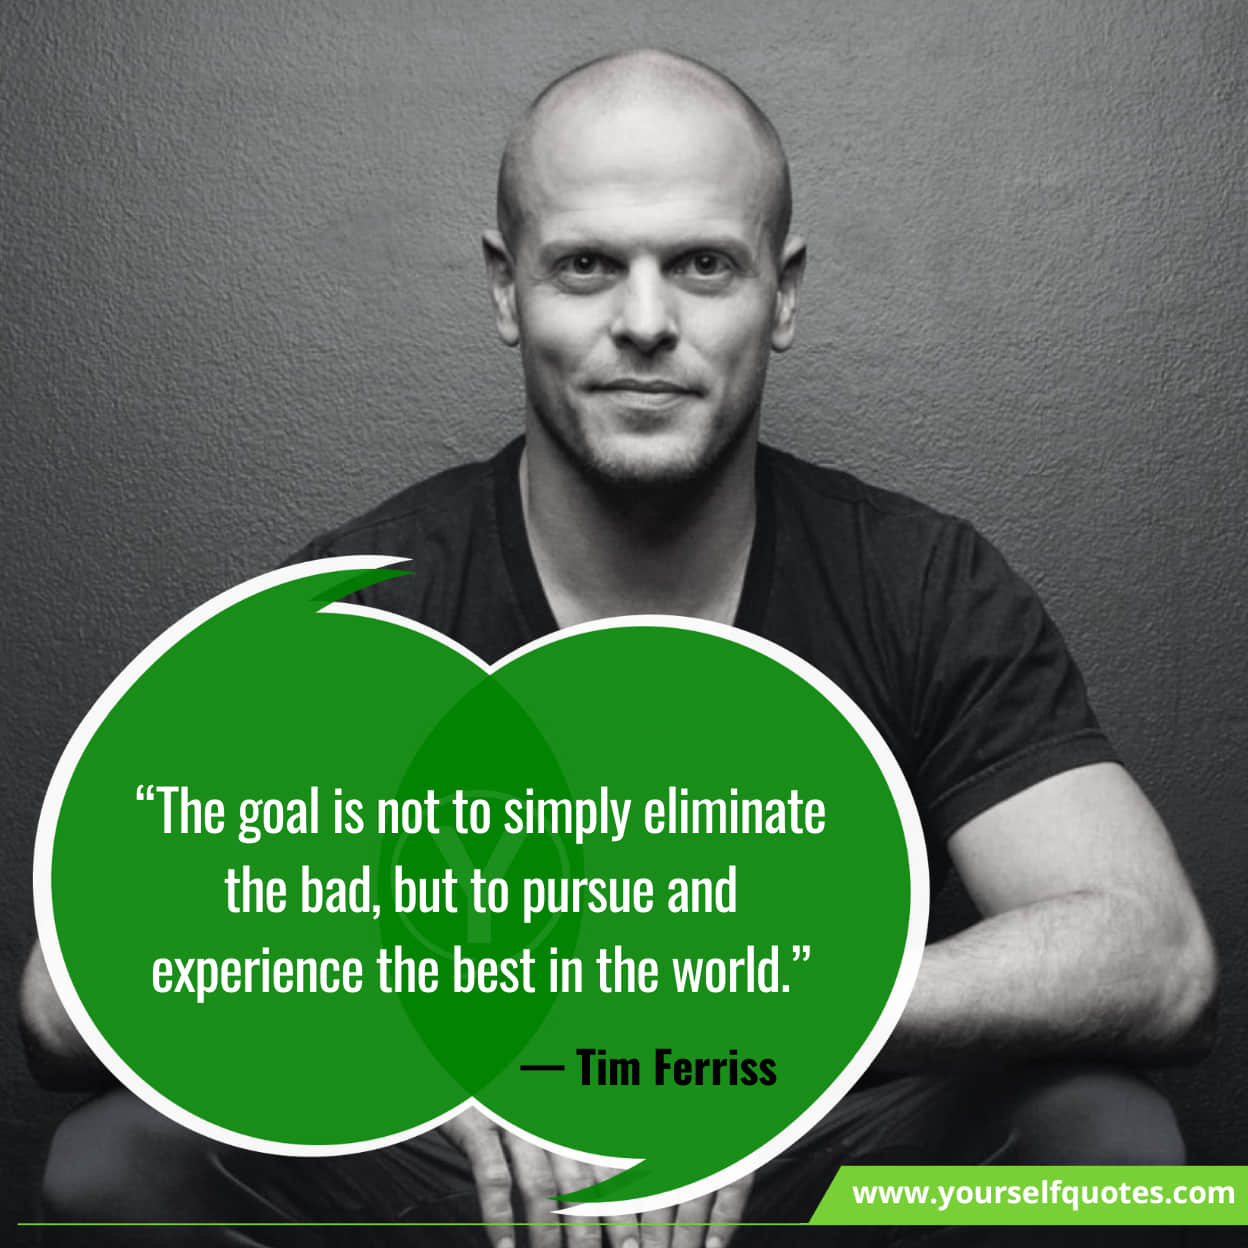 Tim Ferriss Quotes About Inspiring Life